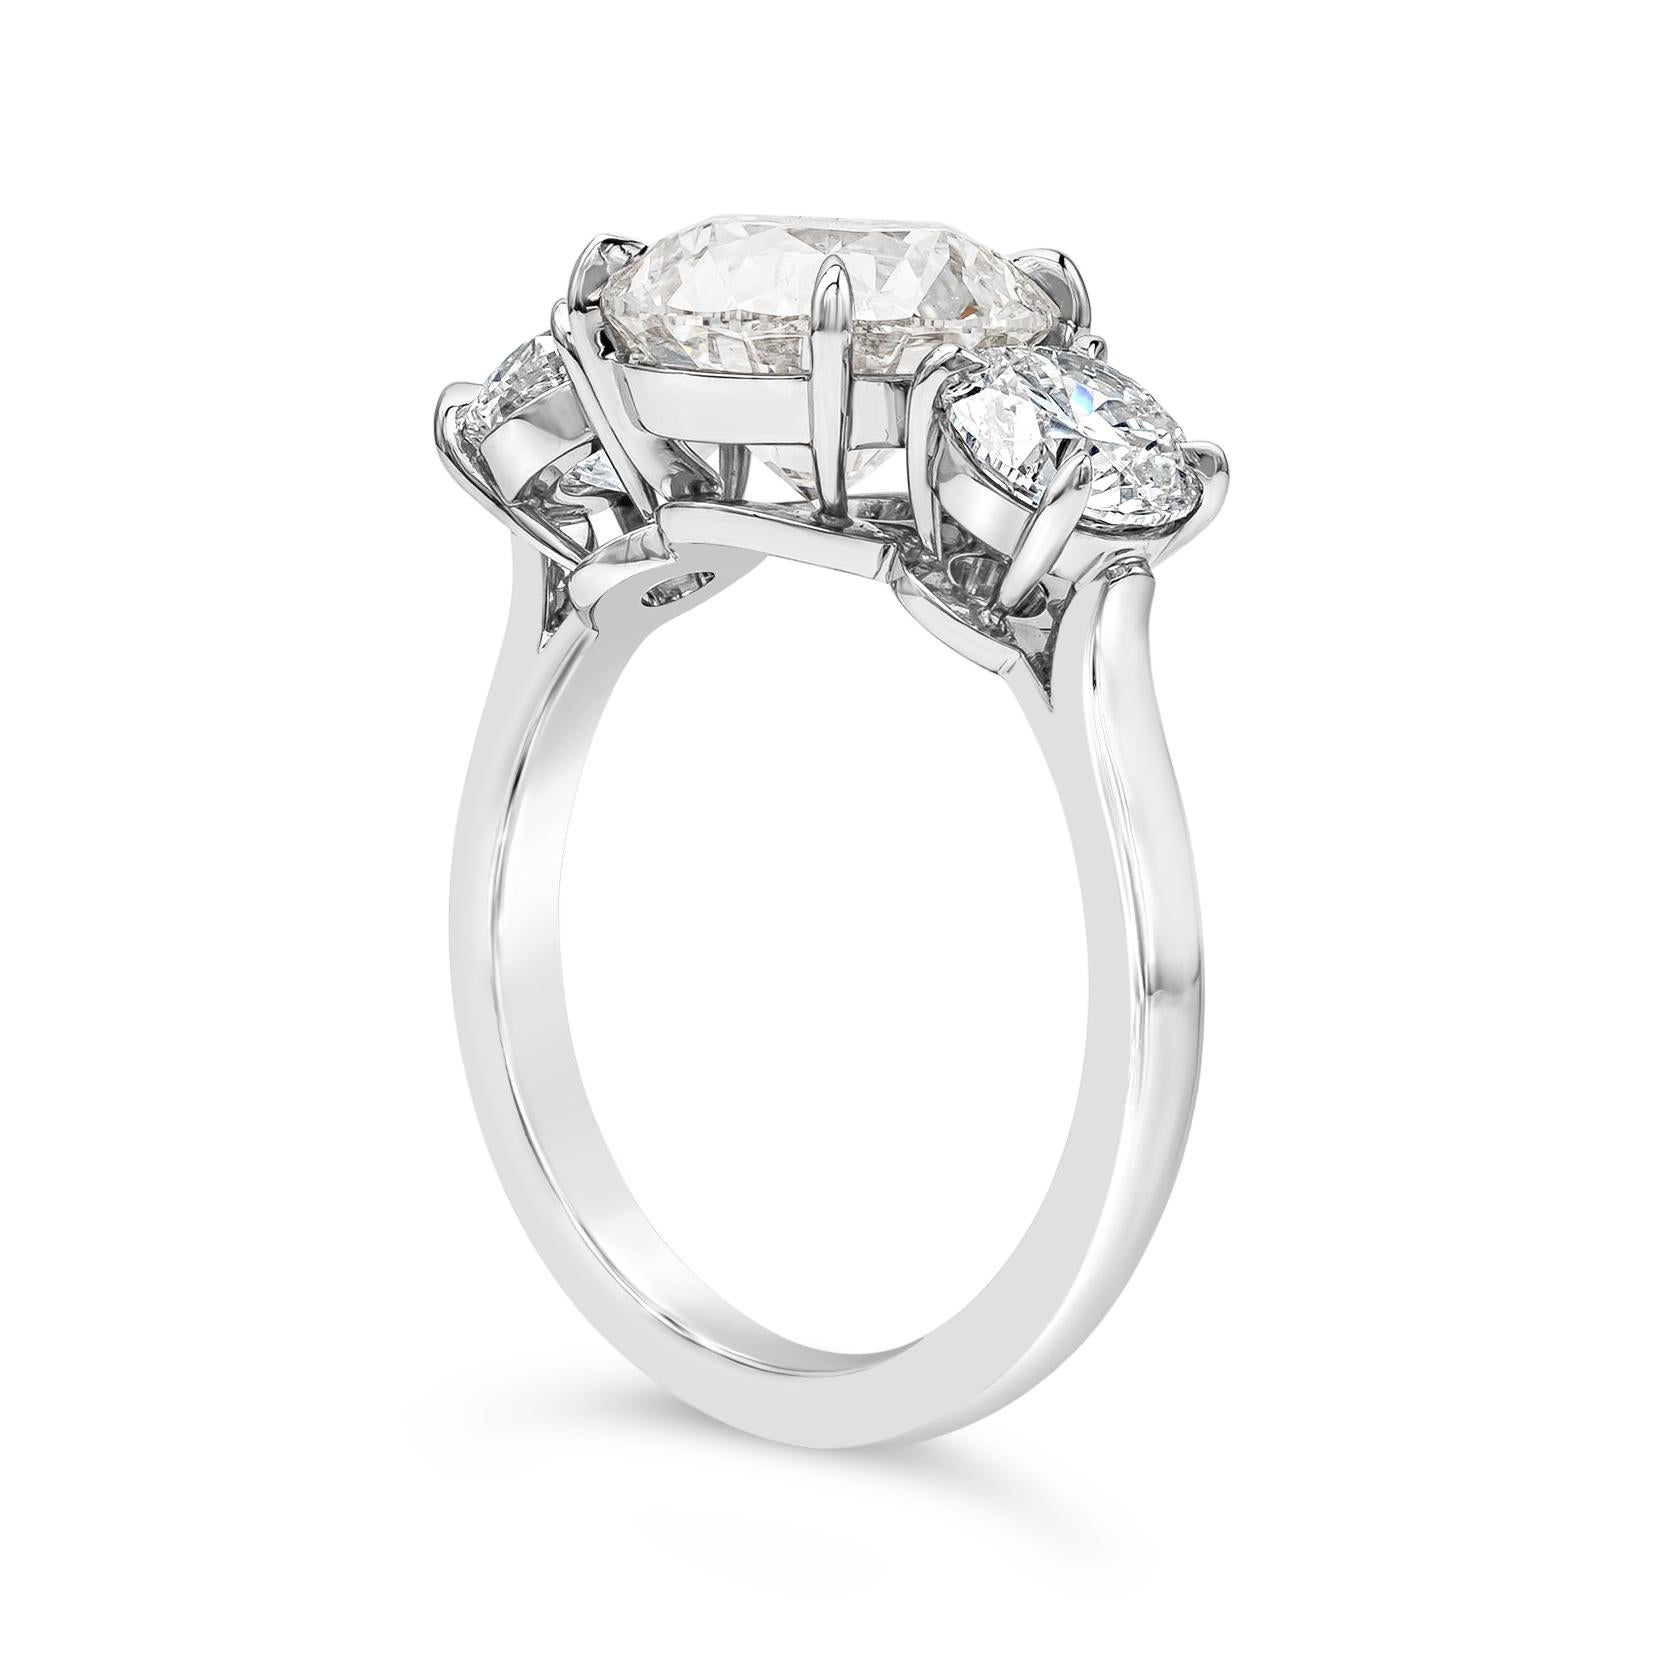 This classy and simple three stone engagement ring showcases a 3.02 carats brilliant round diamond certified by GIA as G color and SI2 in clarity, set in a four prong basket setting. Flanked by round brilliant diamonds on each side weighing 1.40